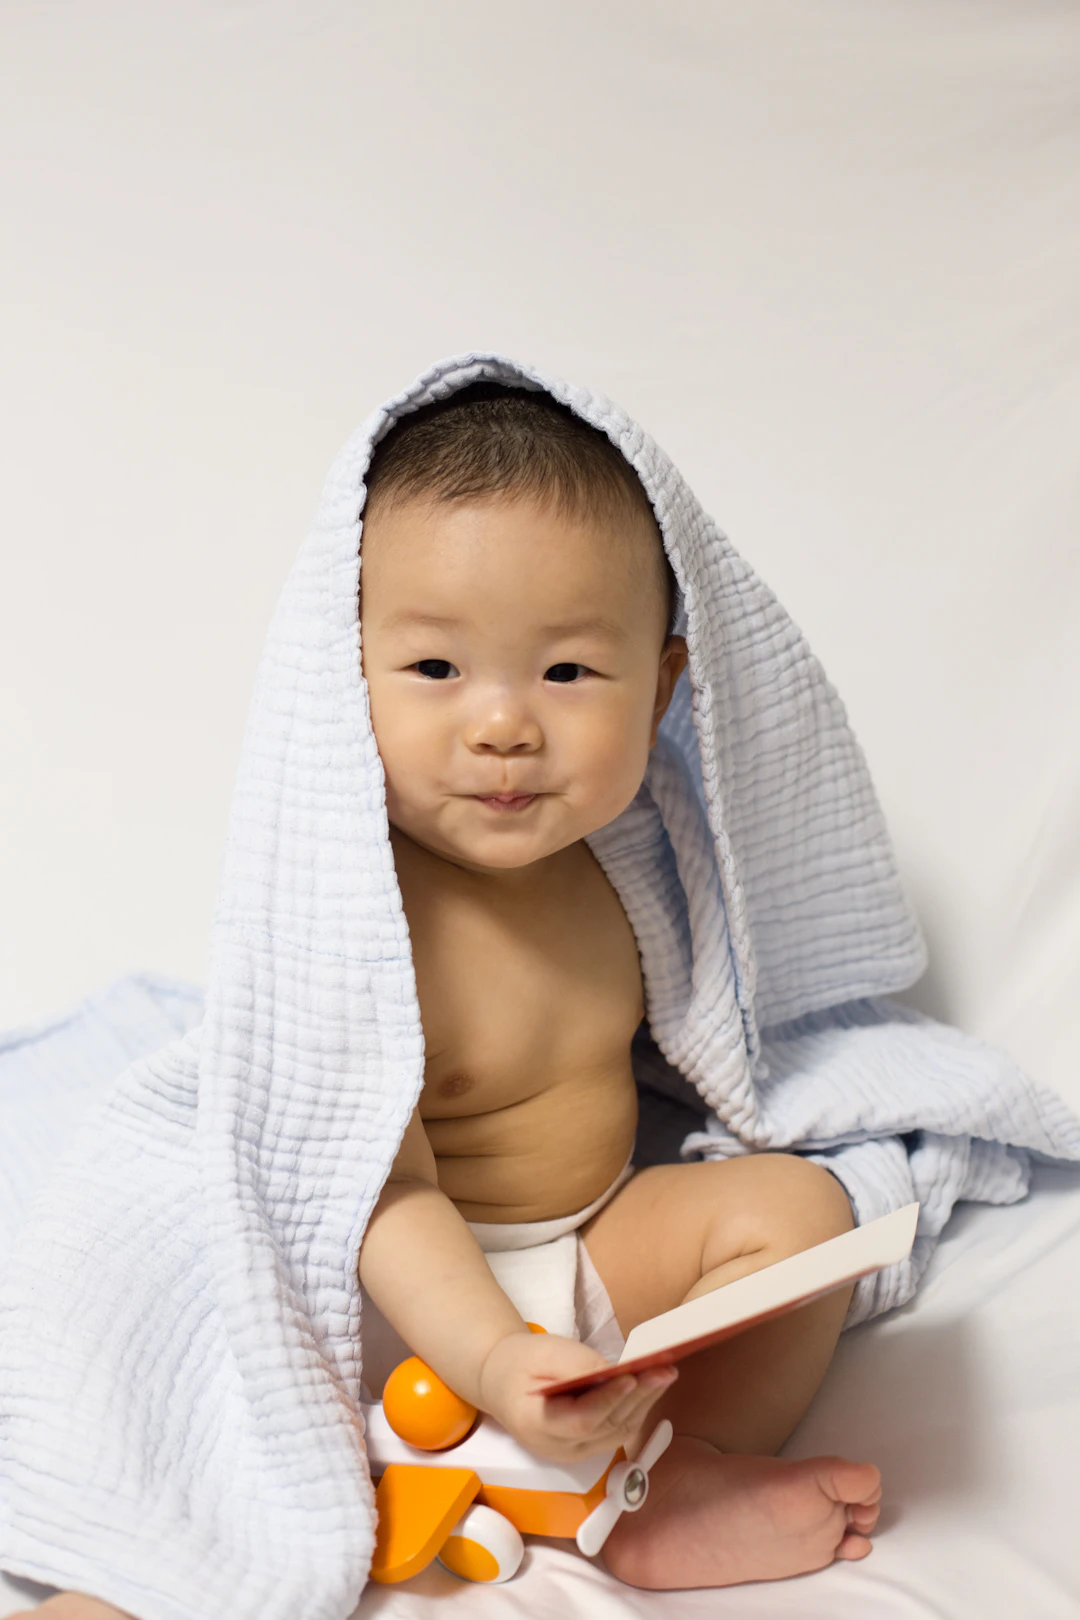 Baby wrapped in a towel holding a toy and book, sitting with a playful expression.